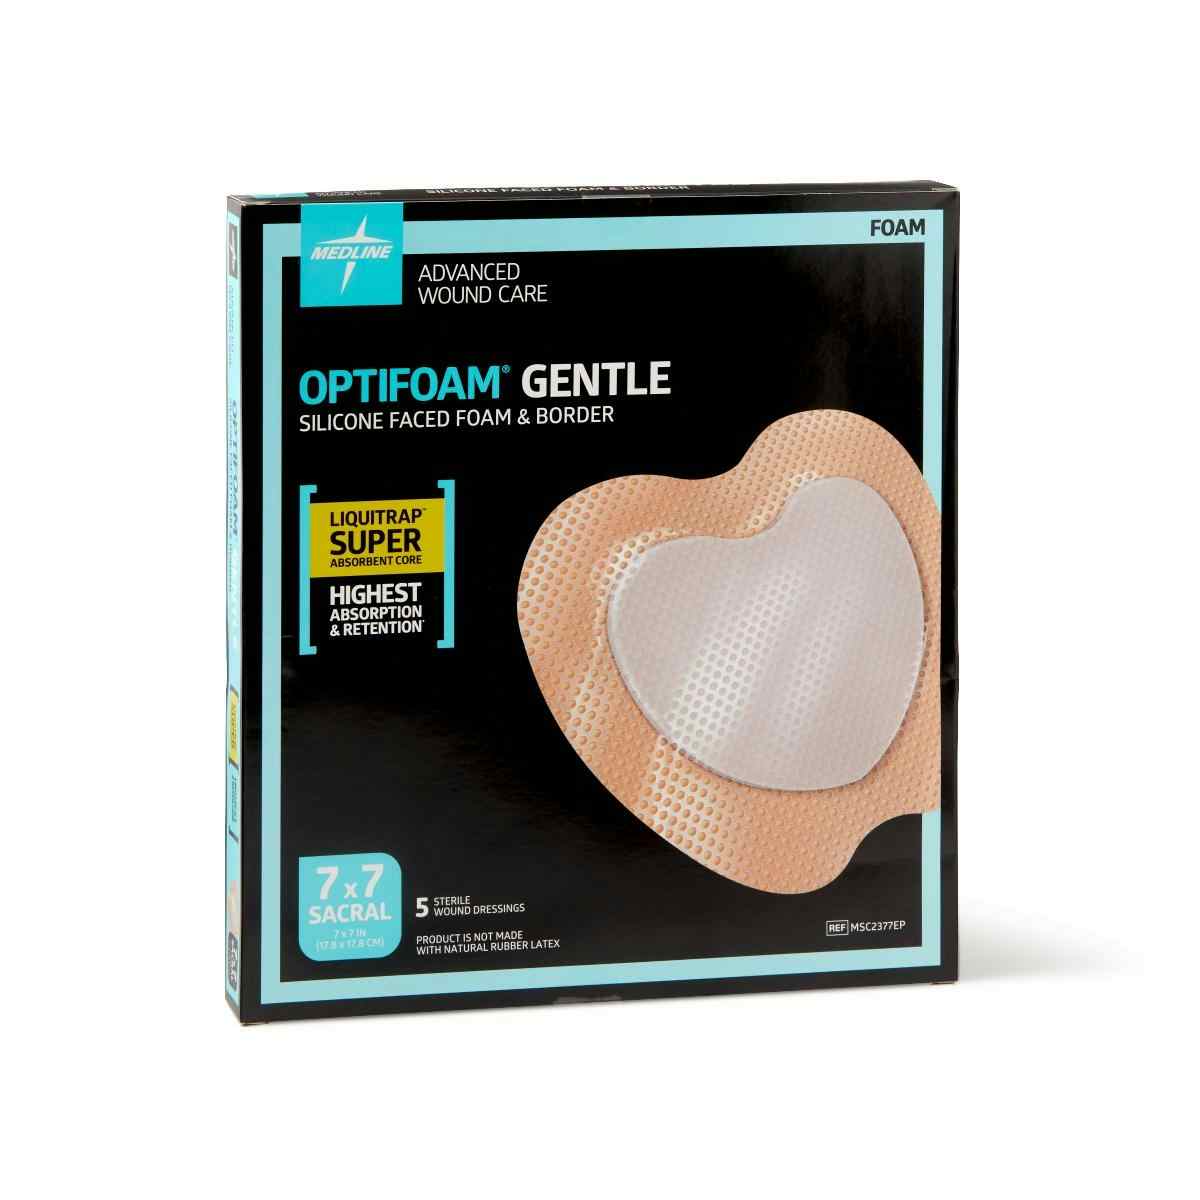 Optifoam Gentle LQ Silicone-Faced Foam Dressing with Liquitrap, MSC2377EPZ, 7 X 7 Inches - Sacrum - Box of 5